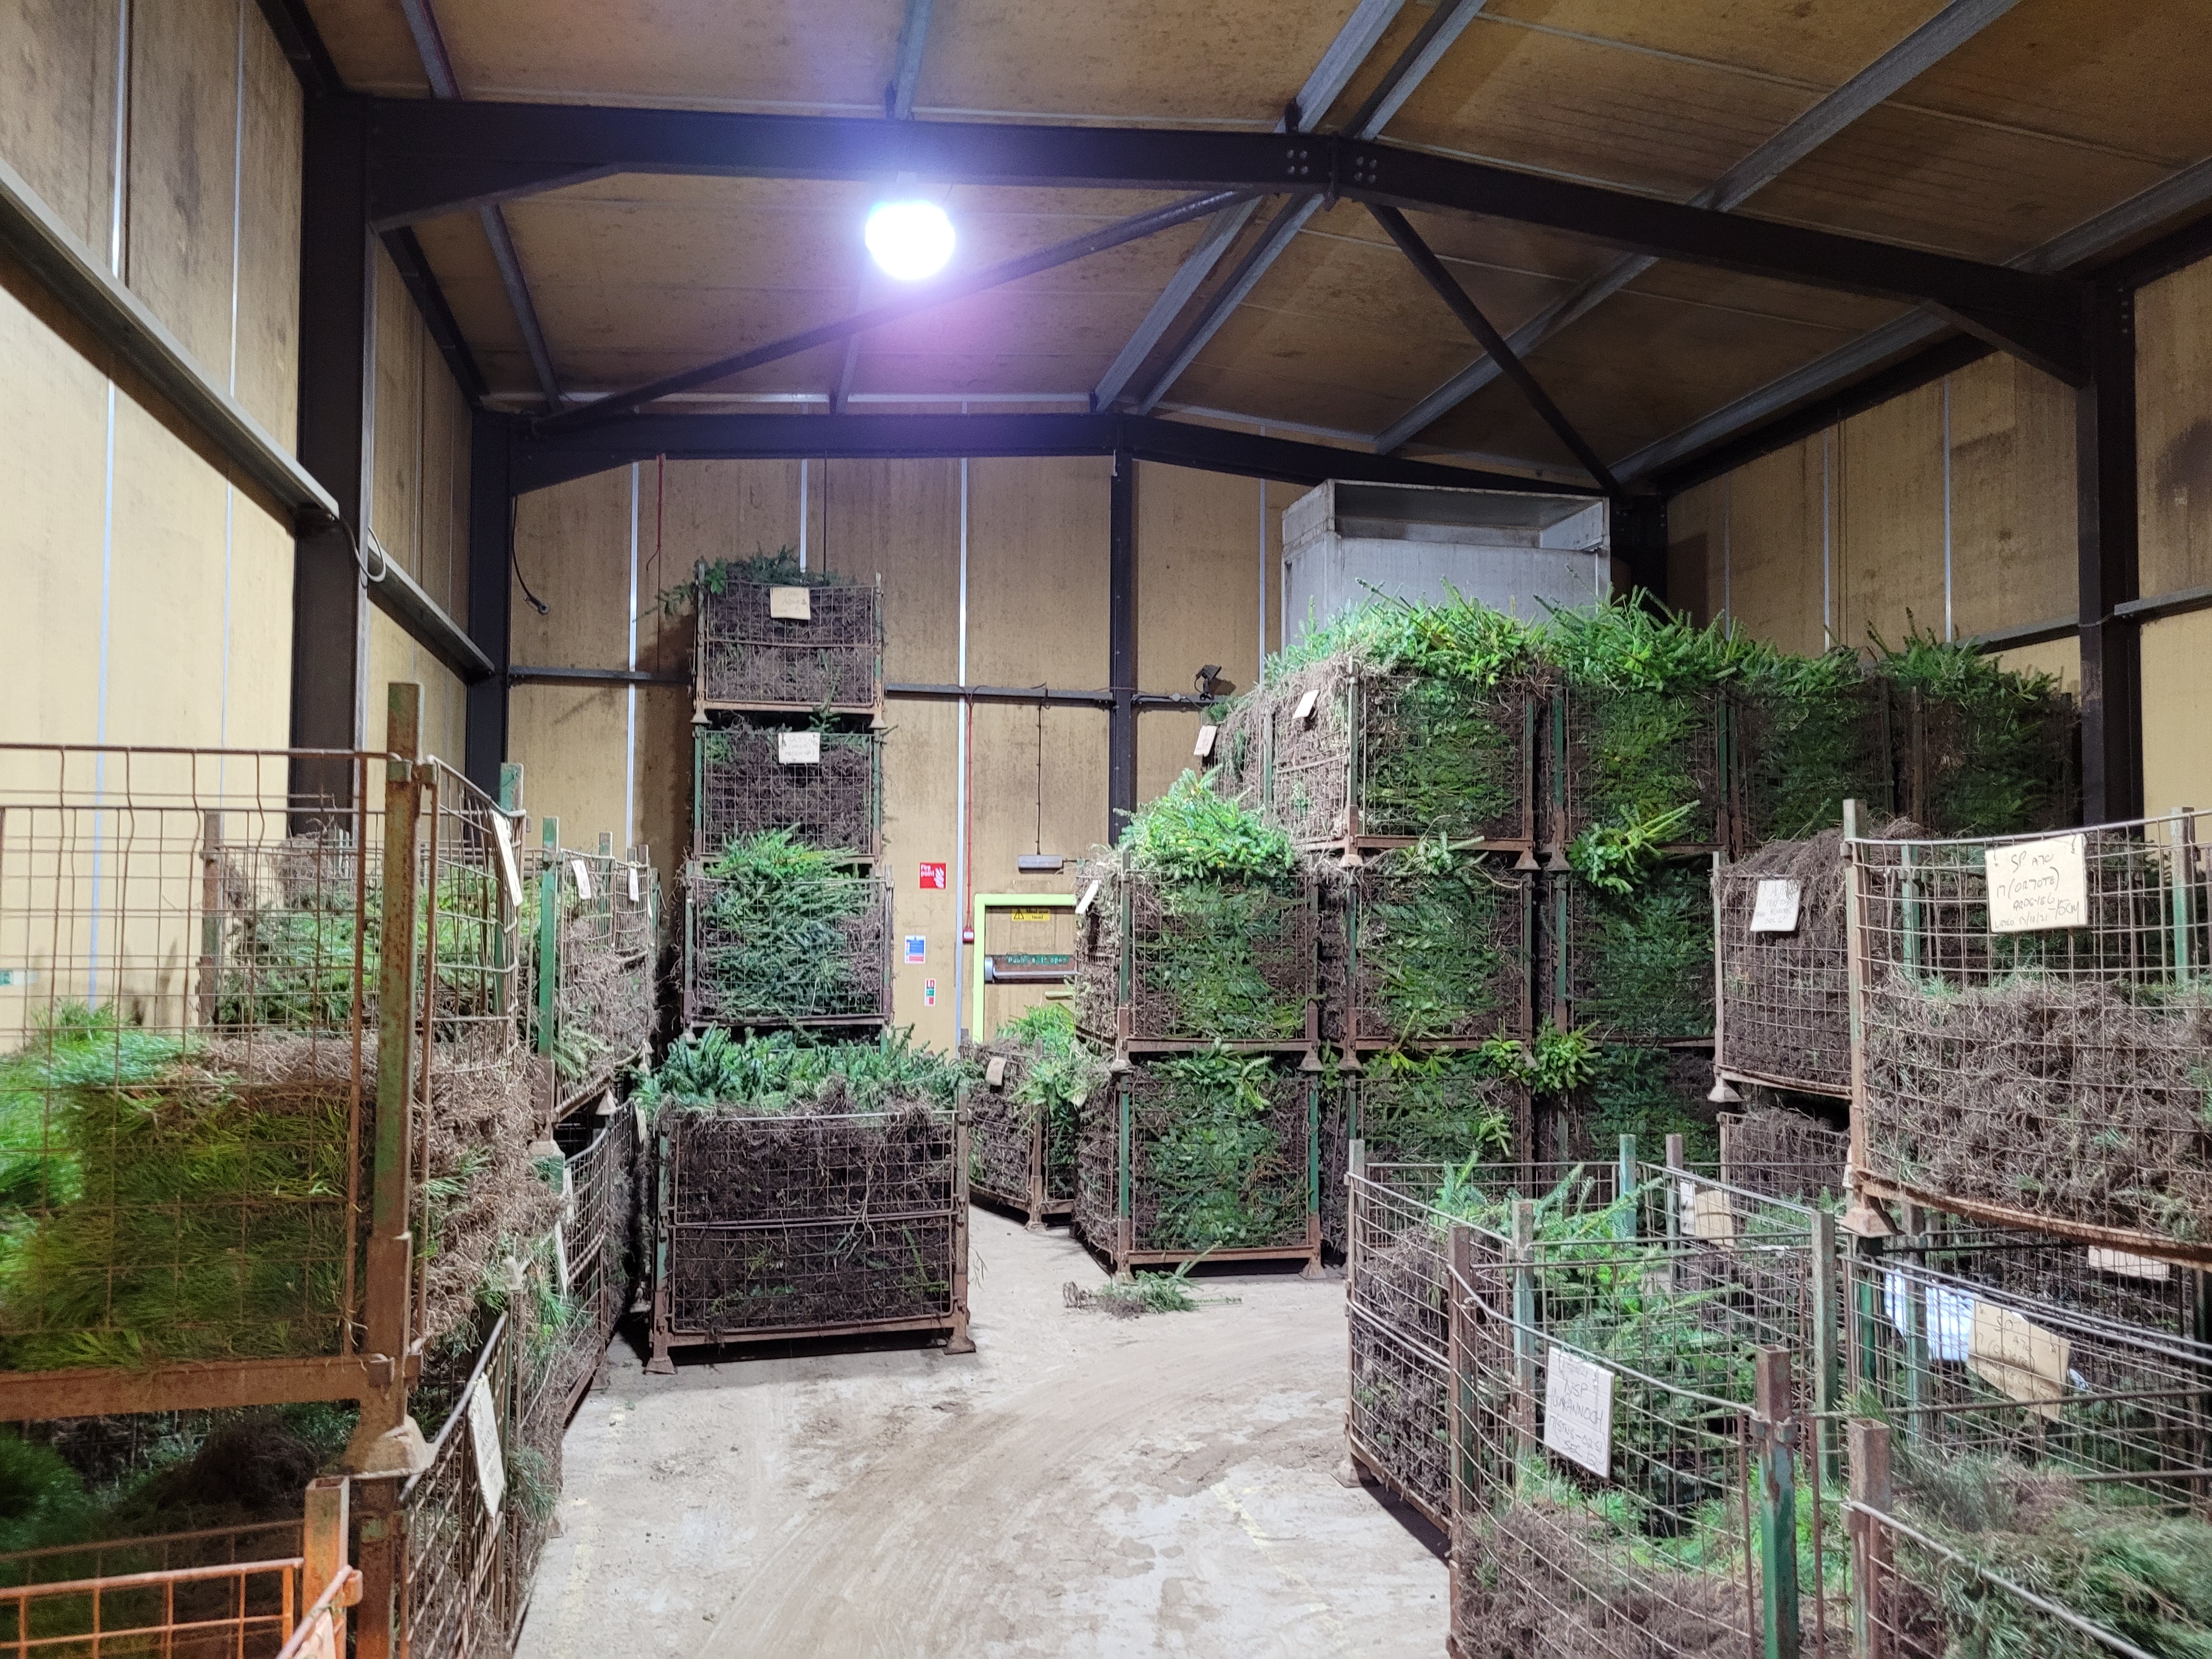 A warehouse with large crates of young trees